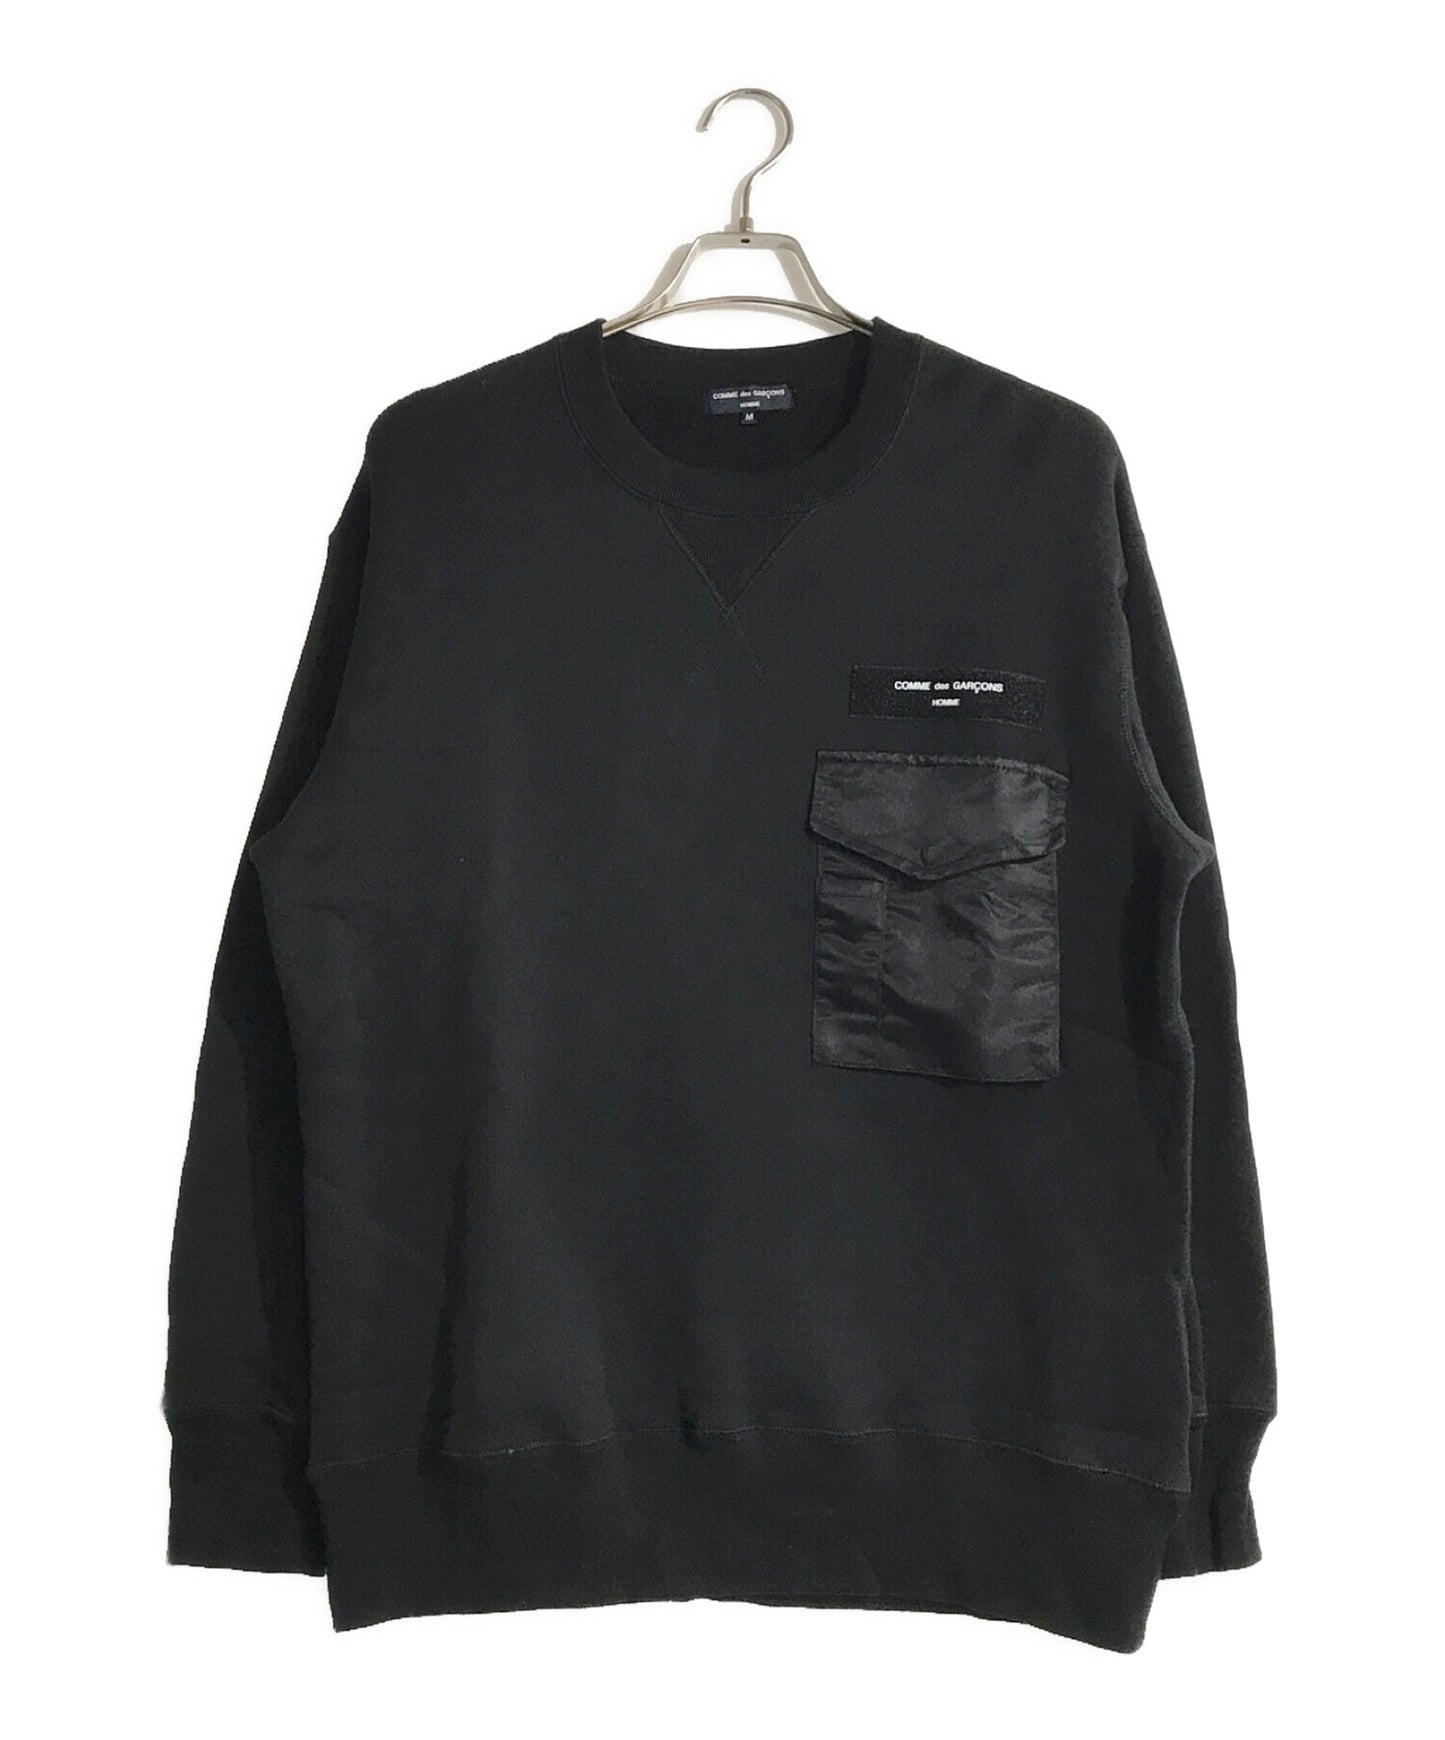 Comme des Garcons Homme Cotton-Backed Brushed Wool 및 Nylon Twill Sweatshirt HJ-T016